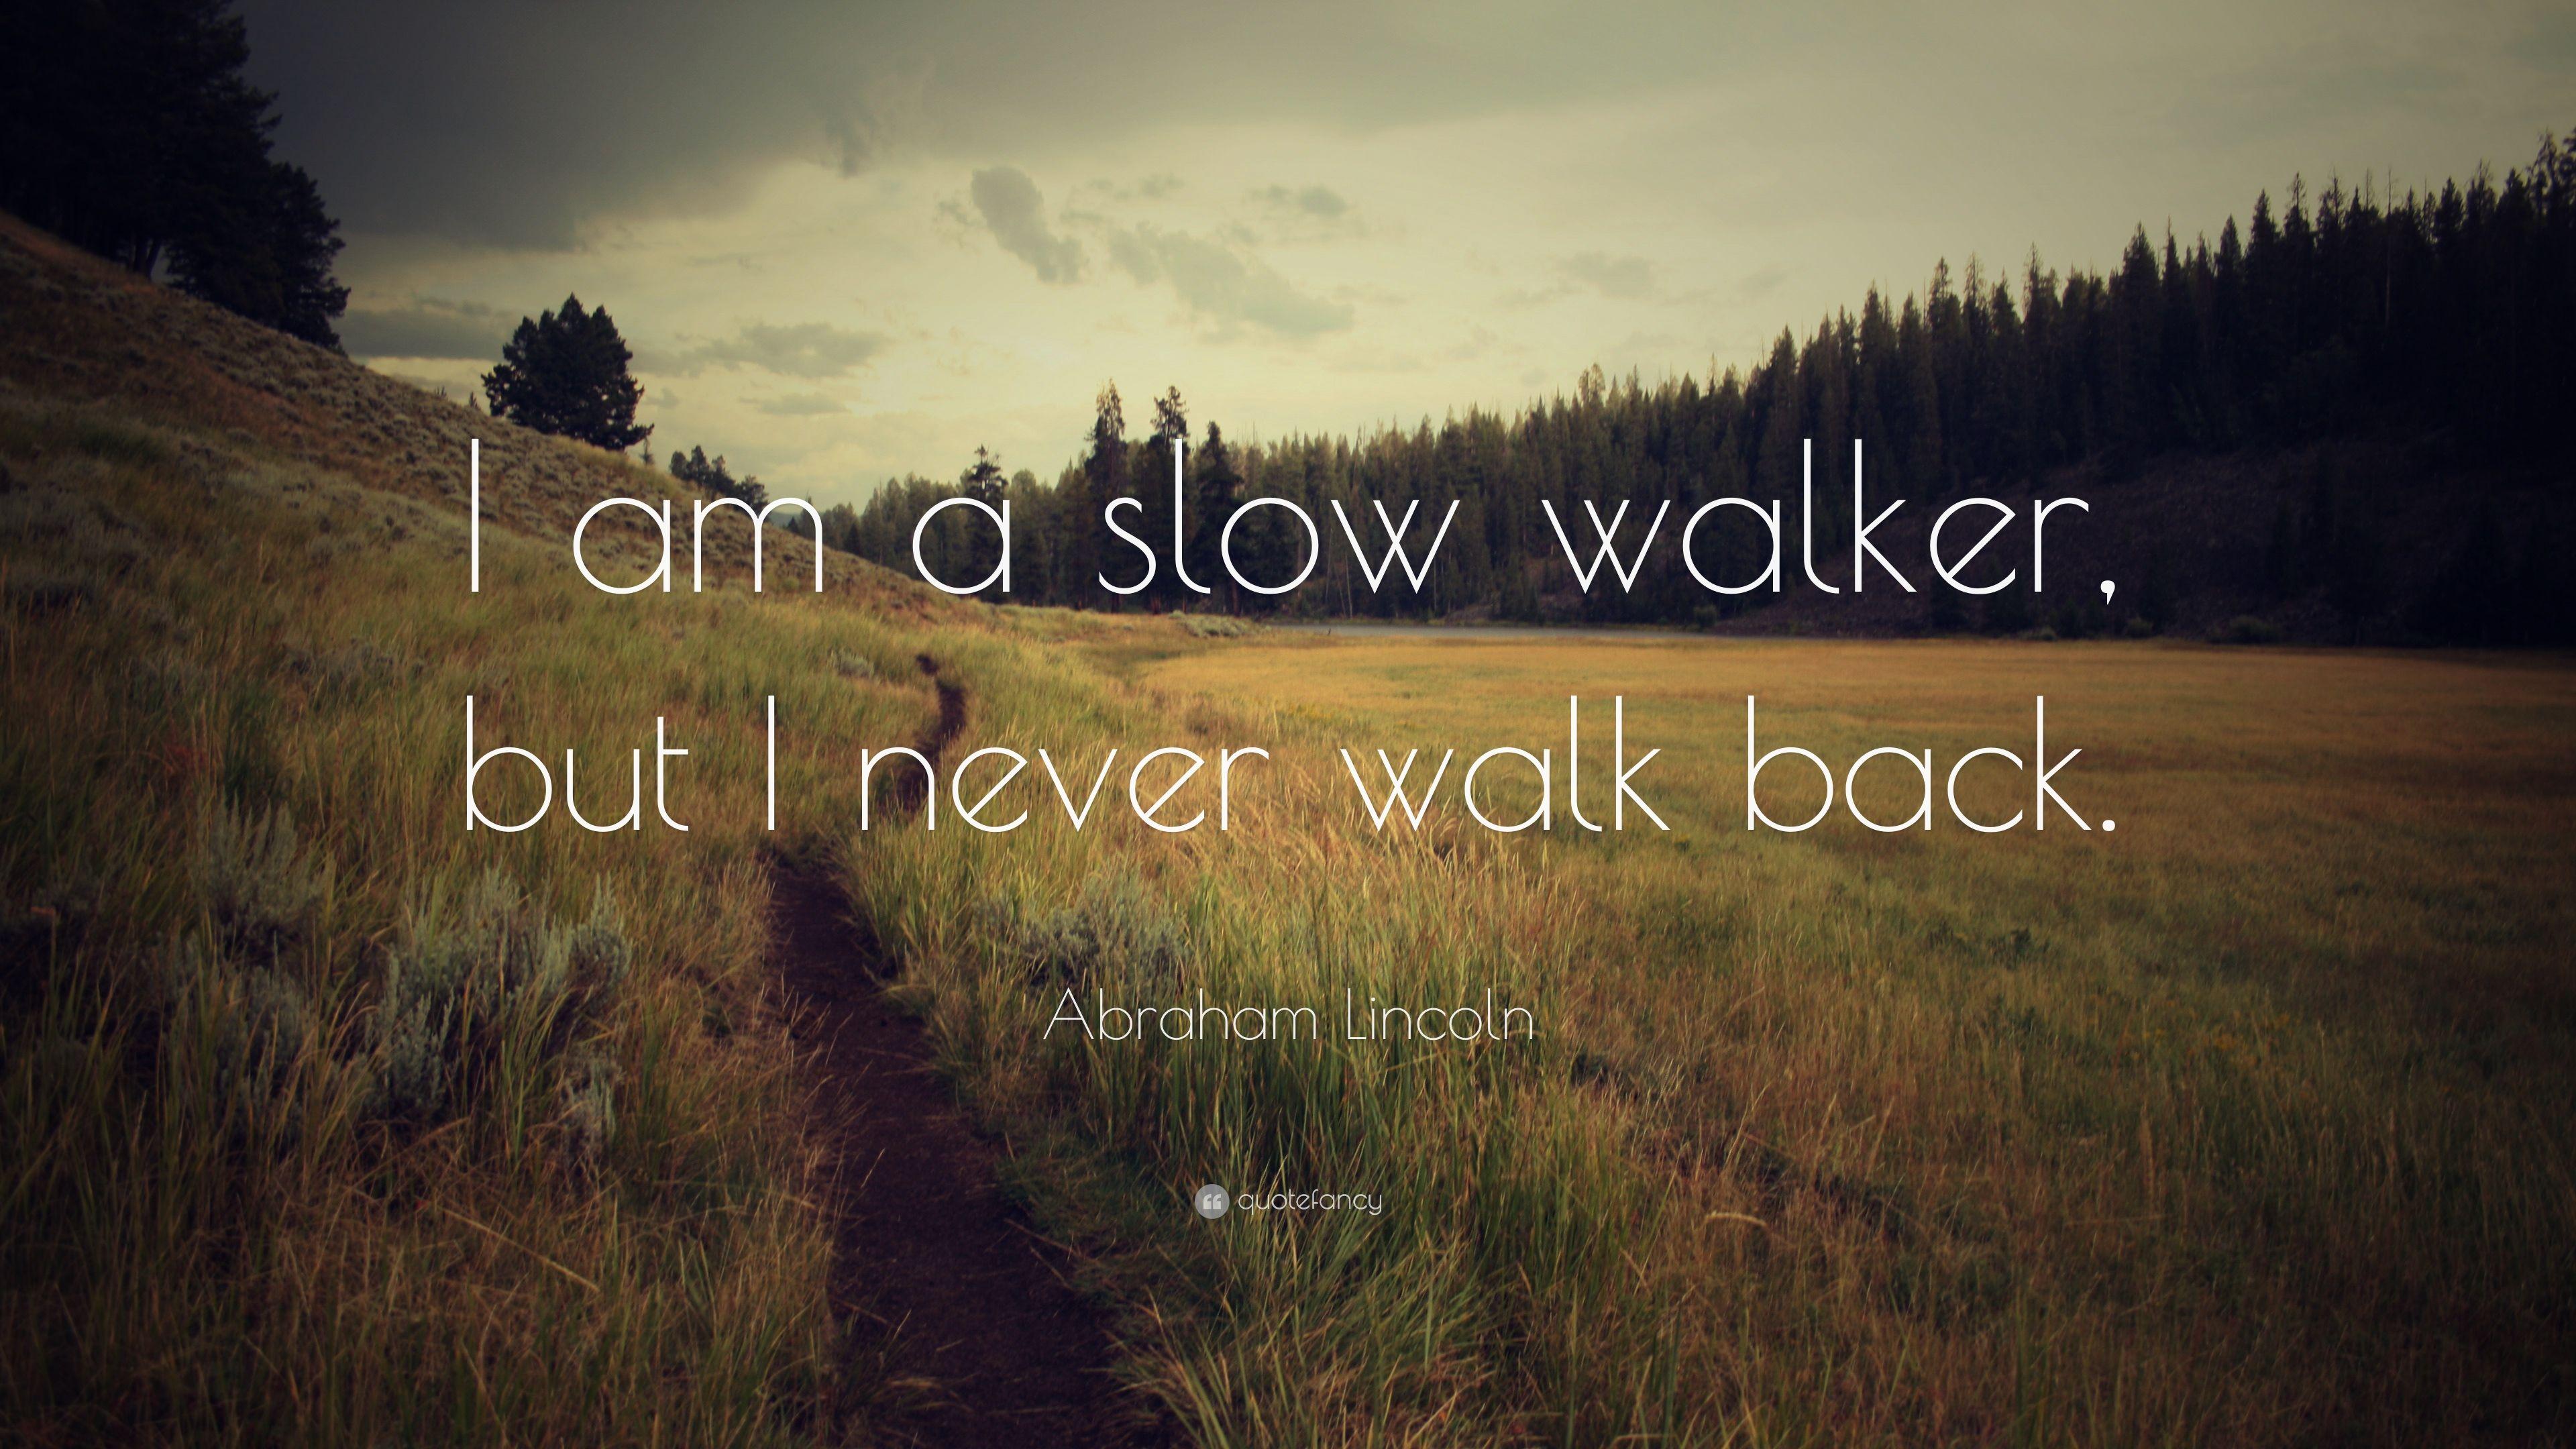 Abraham Lincoln Quote: “I am a slow walker, but I never walk back